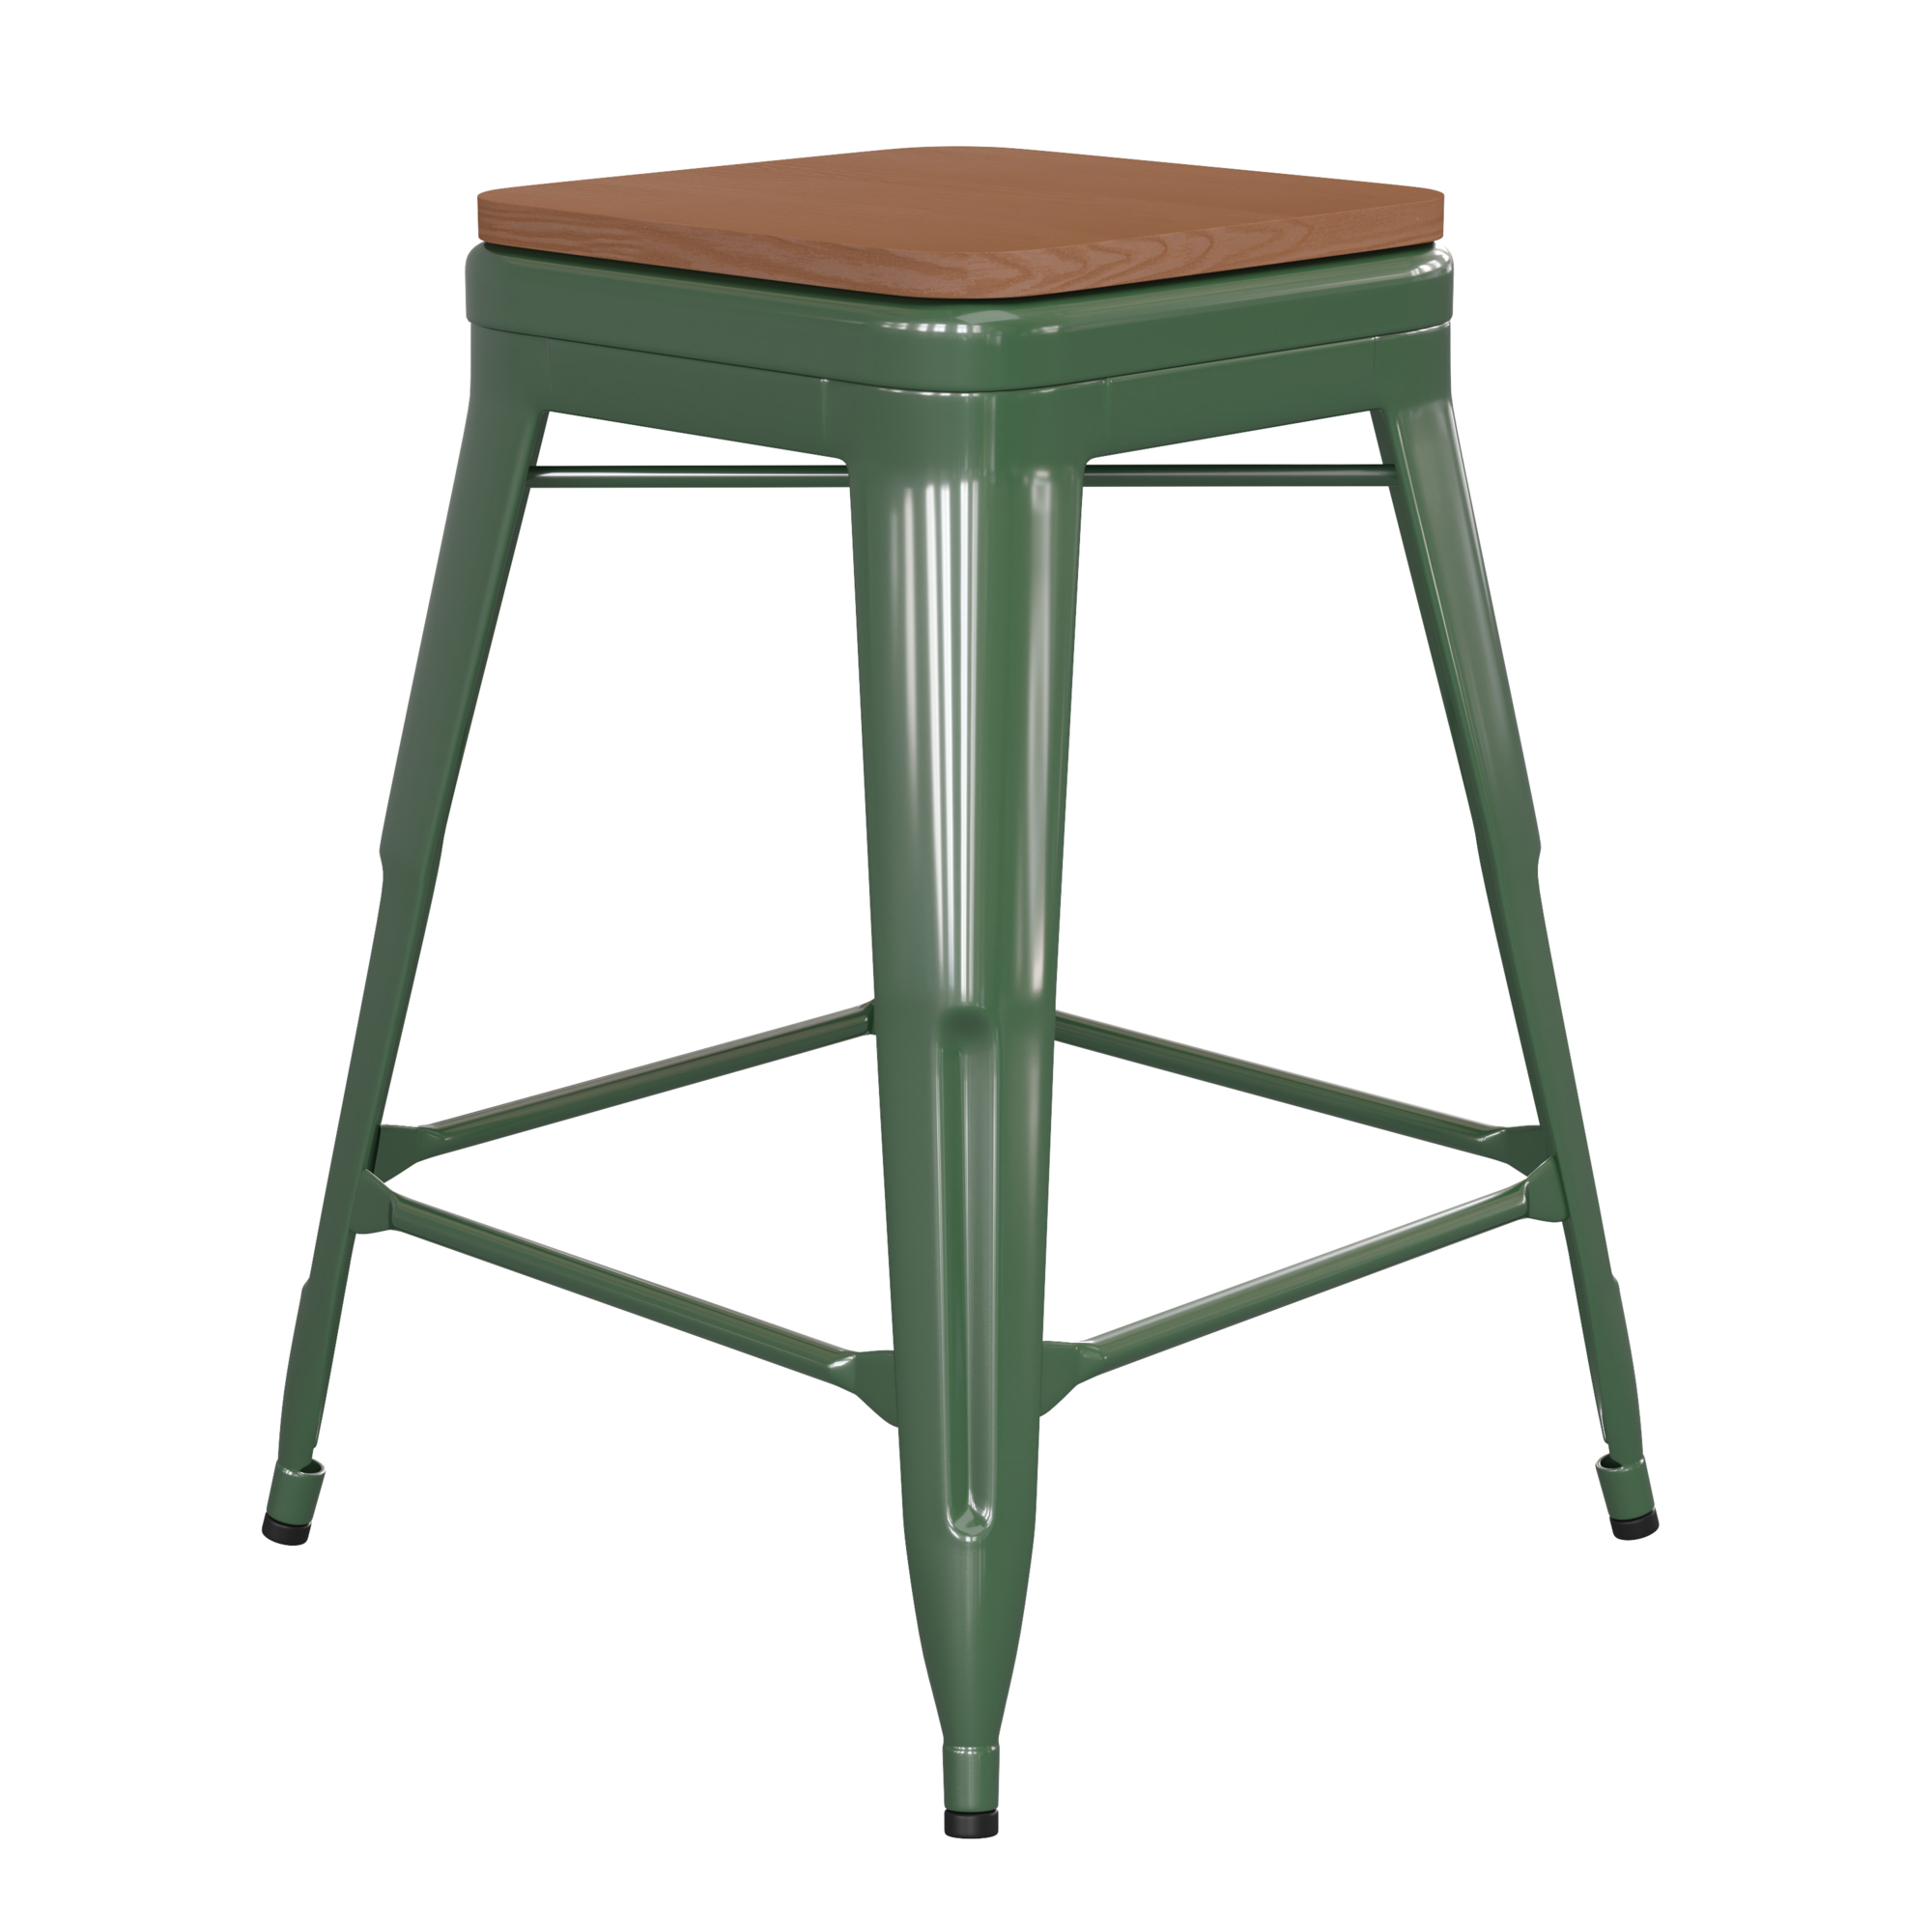 Flash Furniture, 24Inch Green Metal Stool-Teak Poly Seat, Primary Color Green, Included (qty.) 1, Model CH3132024GNPL2T